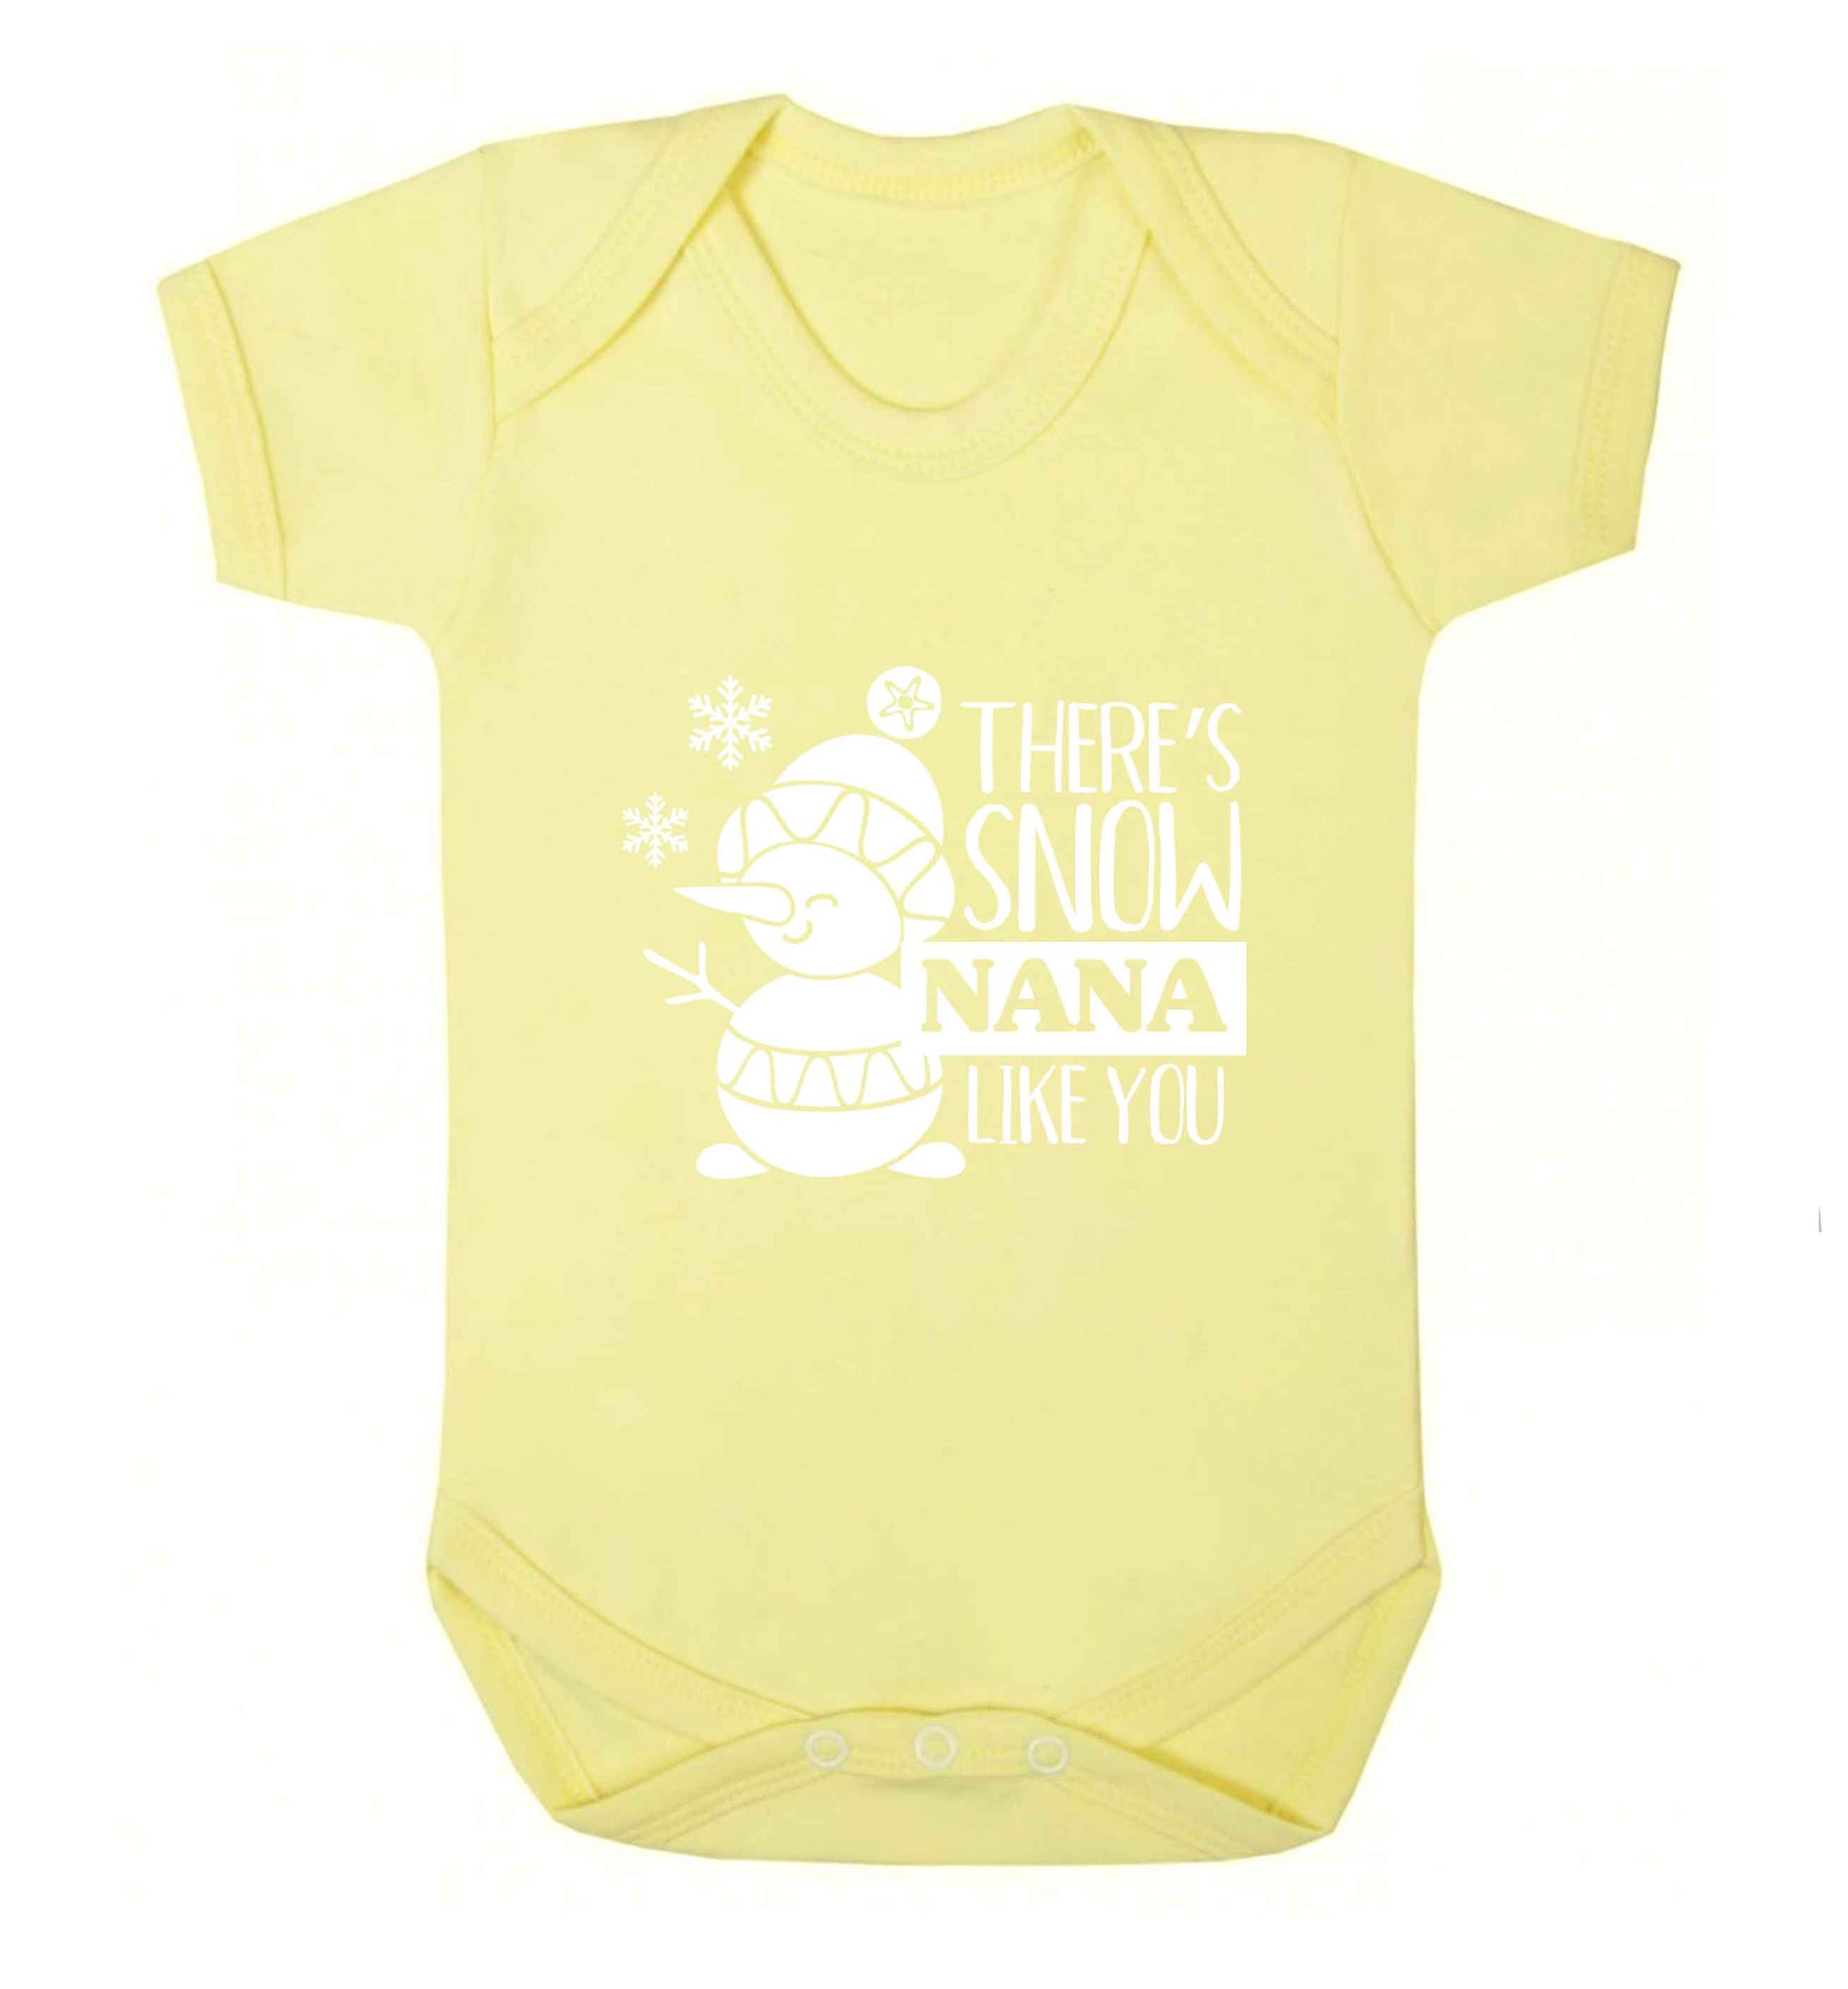 There's snow nana like you baby vest pale yellow 18-24 months